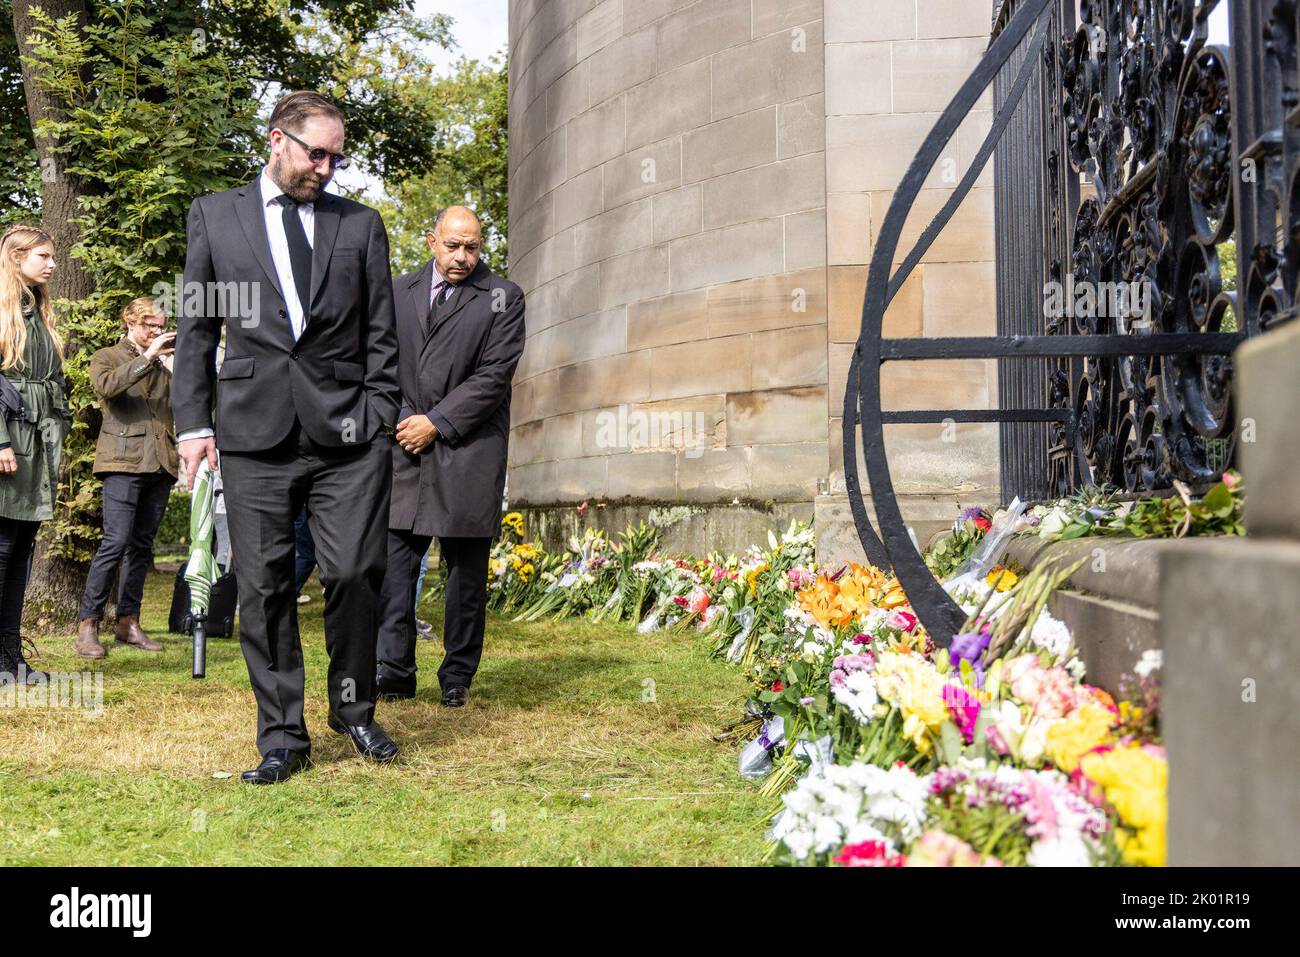 Edinburgh, United Kingdom. 09 September, 2022 Pictured: A mourner at the Palace of Holyroodhouse in Edinburgh. Credit: Rich Dyson/Alamy Live News Stock Photo